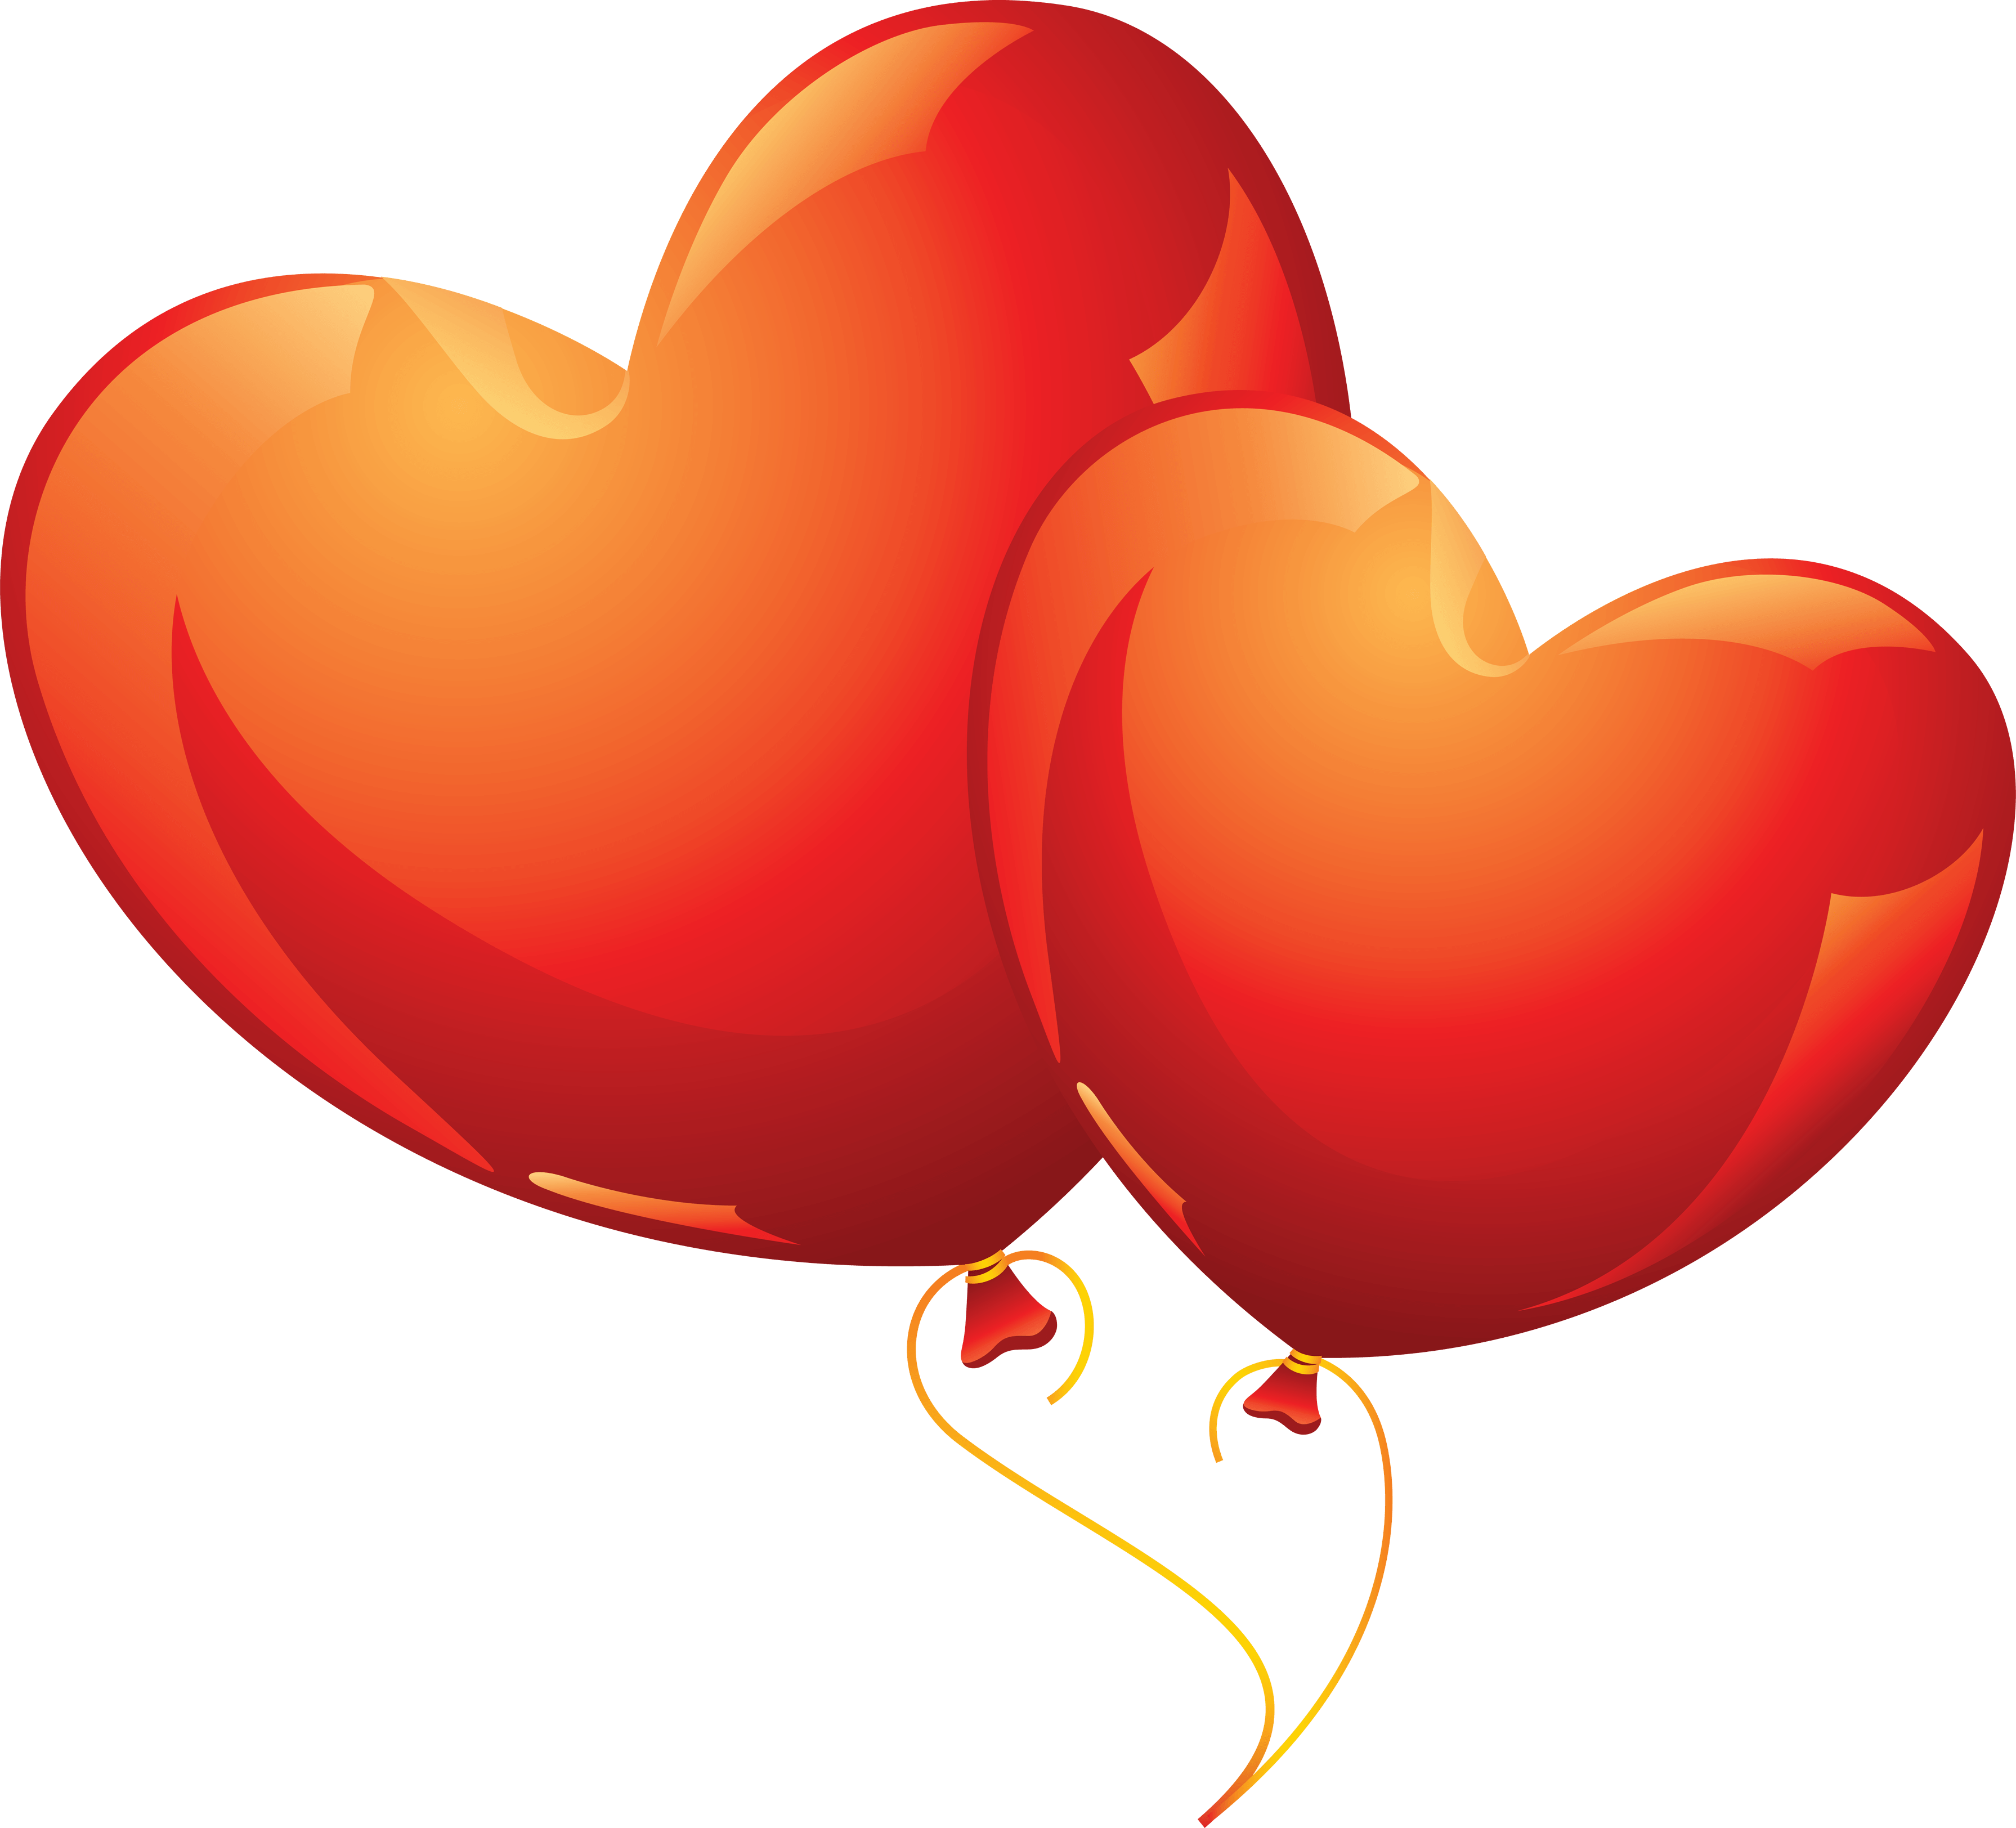 Heart Balloons PNG Transparent Image